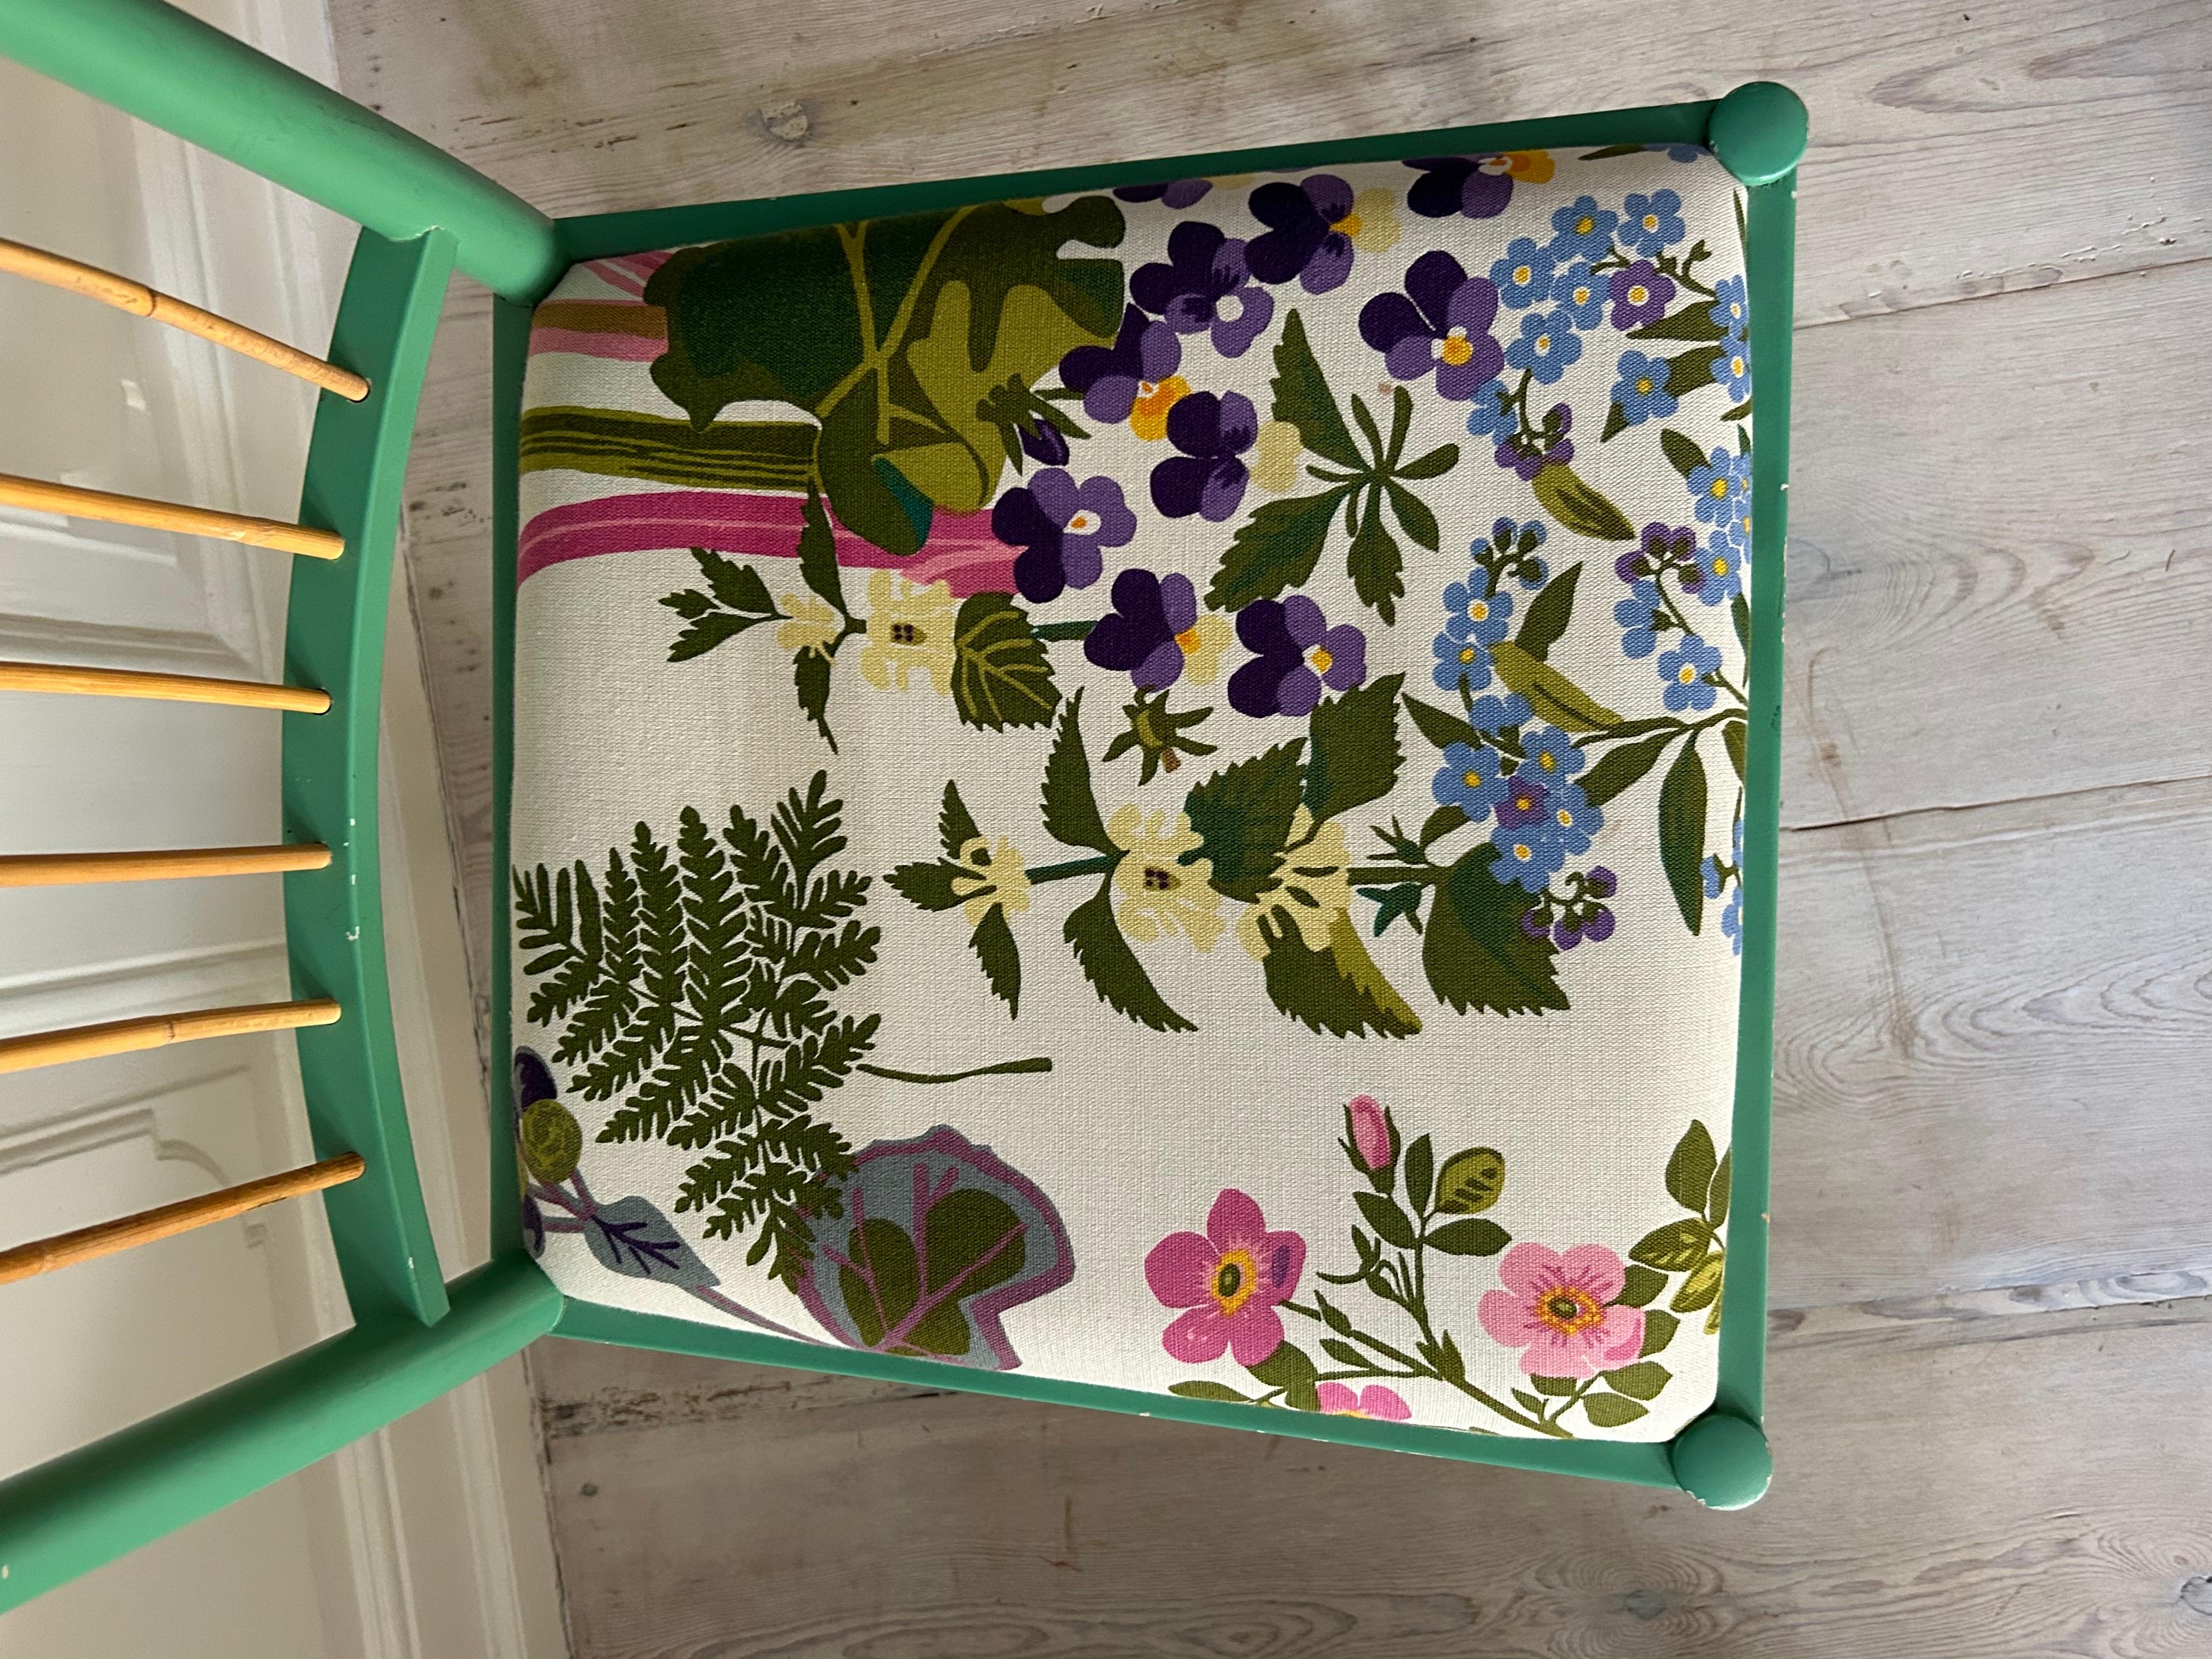 Vintage Green Josef Frank “Chair 2025” with Bamboo and Textile, Sweden, 1970s For Sale 5